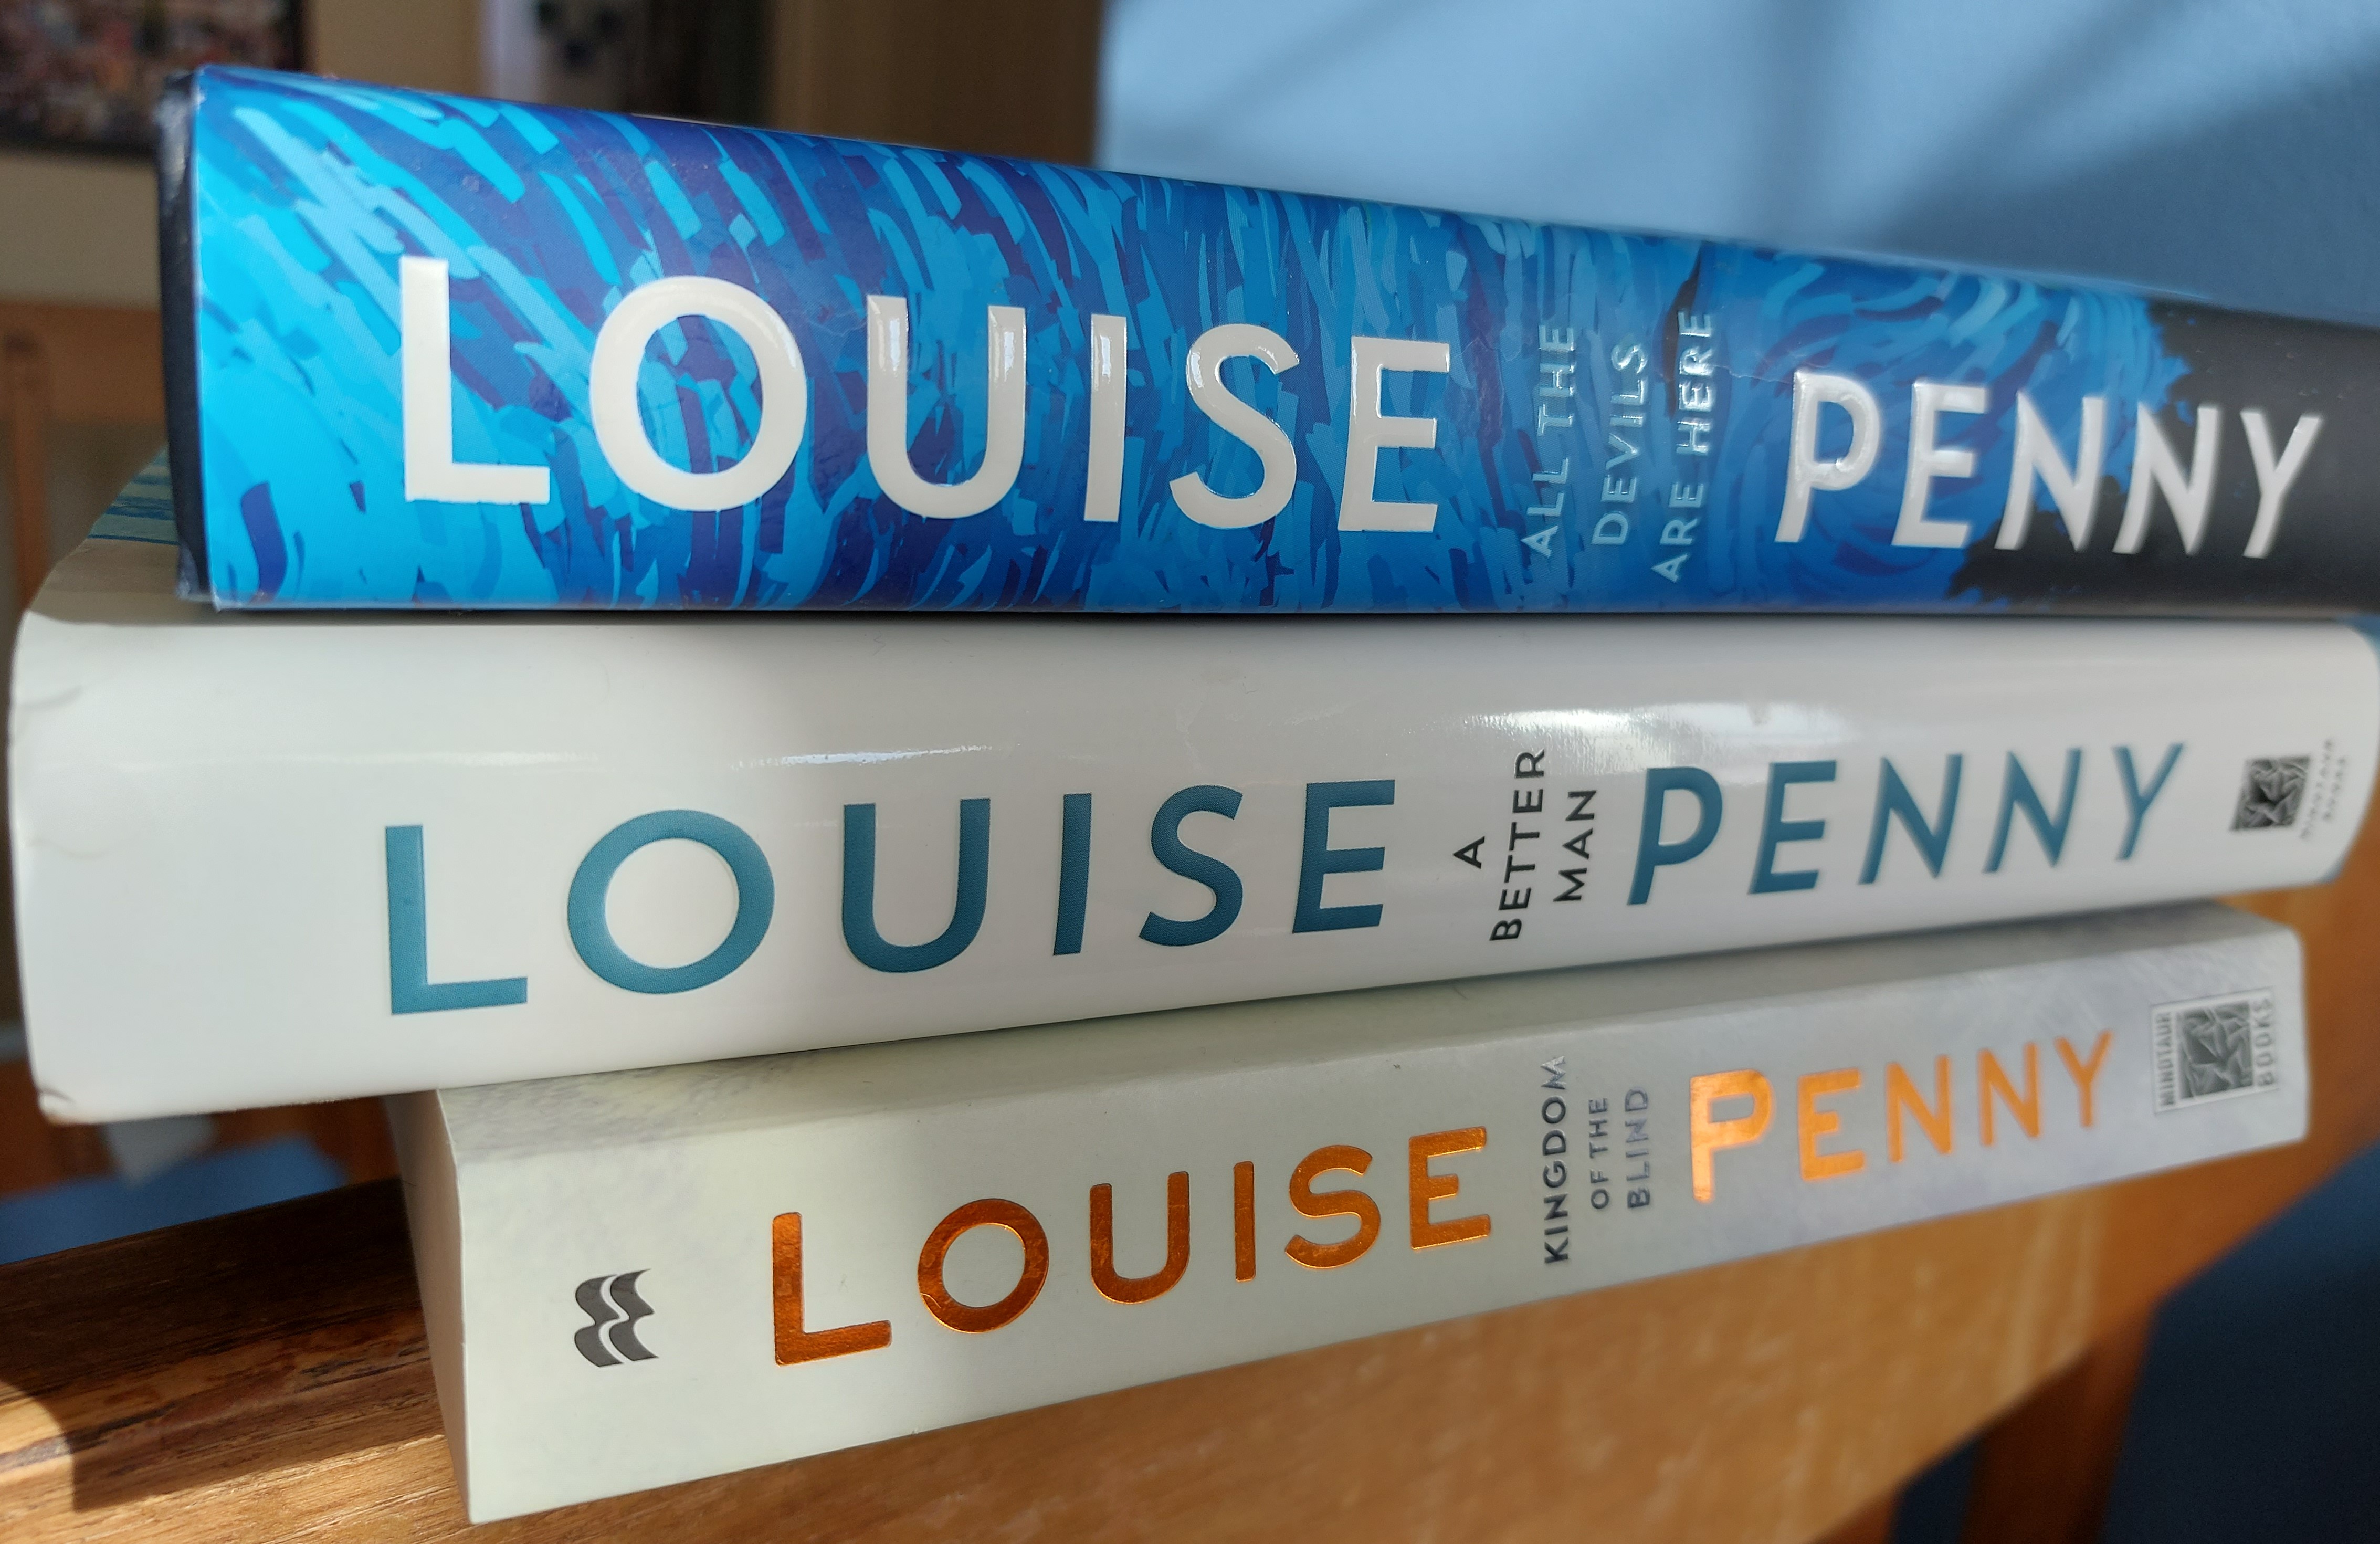 Settings of Louise Penny's mystery novels come to life in rural Quebec